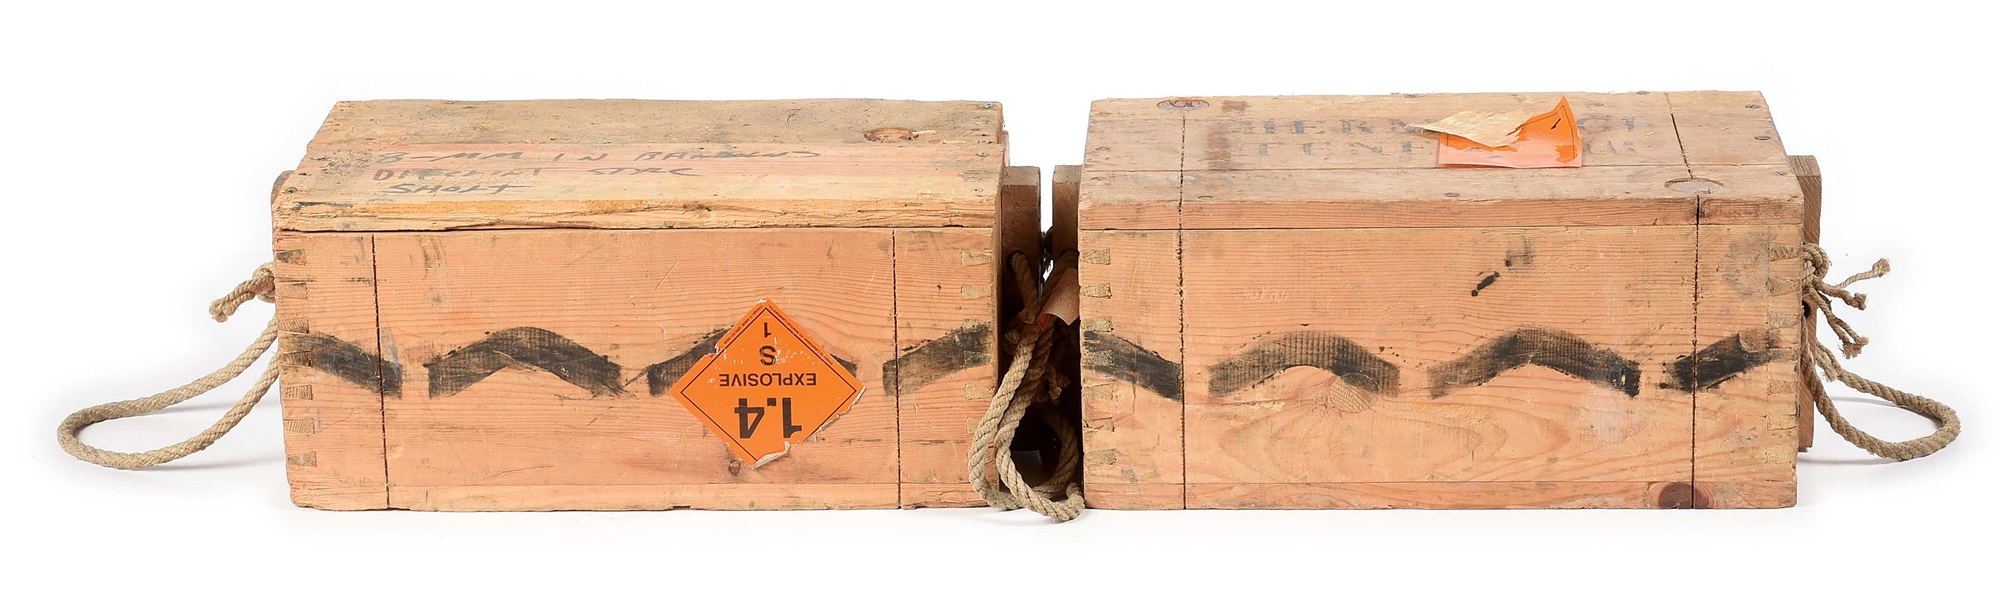 LOT OF 2800 ROUNDS OF TURKISH 8MM MAUSER AMMUNITION WITH STRIPPER CLIPS IN ORIGINAL CRATES.